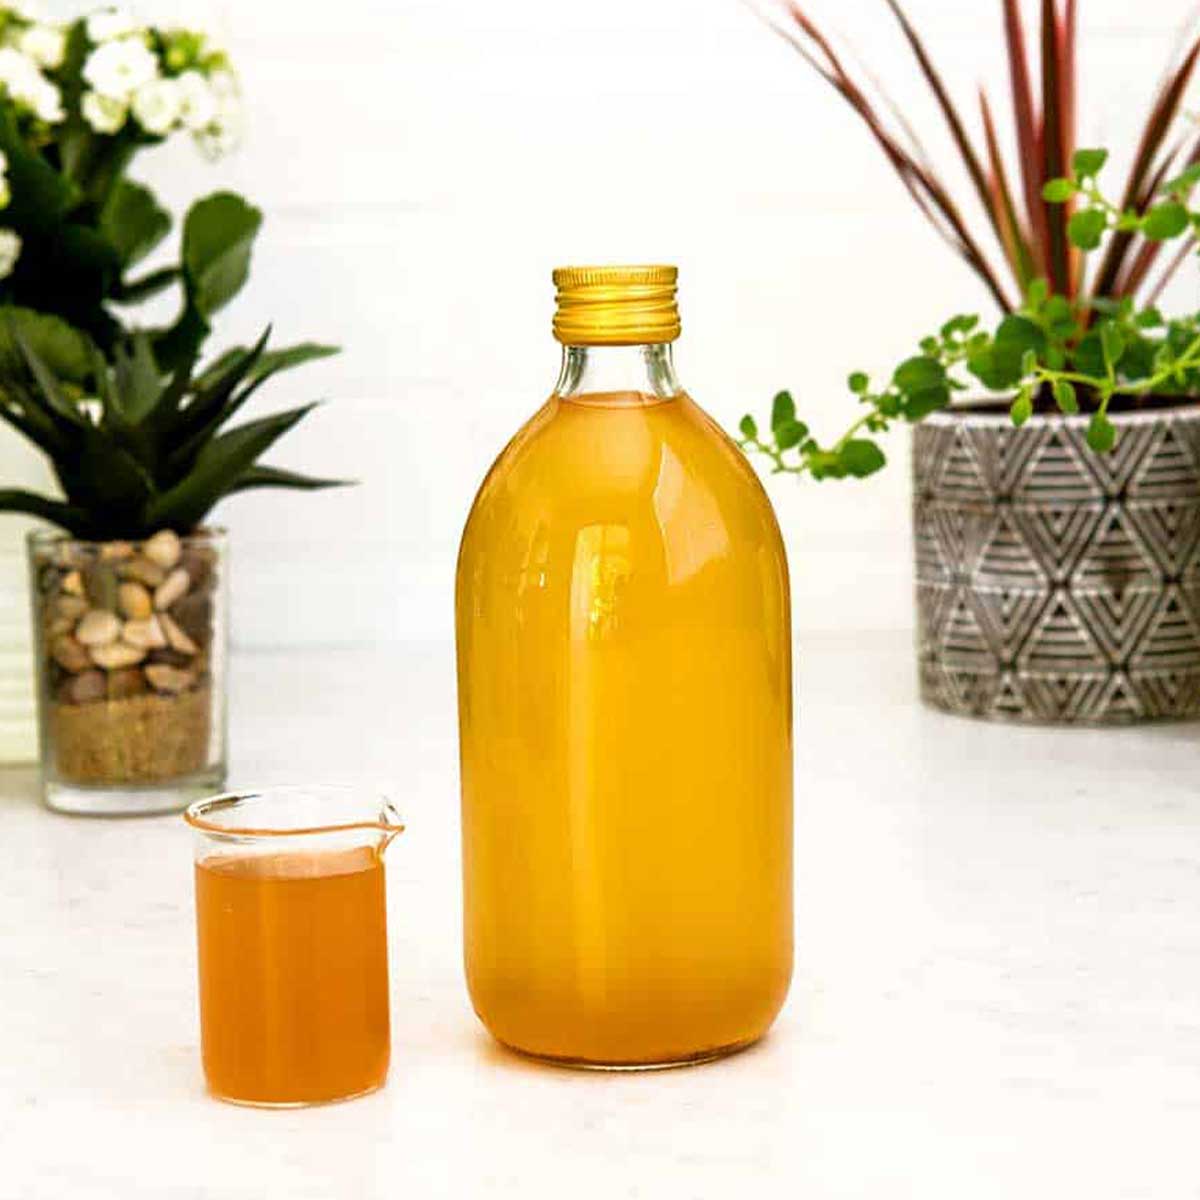 apple cider vinegar drink in a small glass next to a large glass jar of homemade ACV.